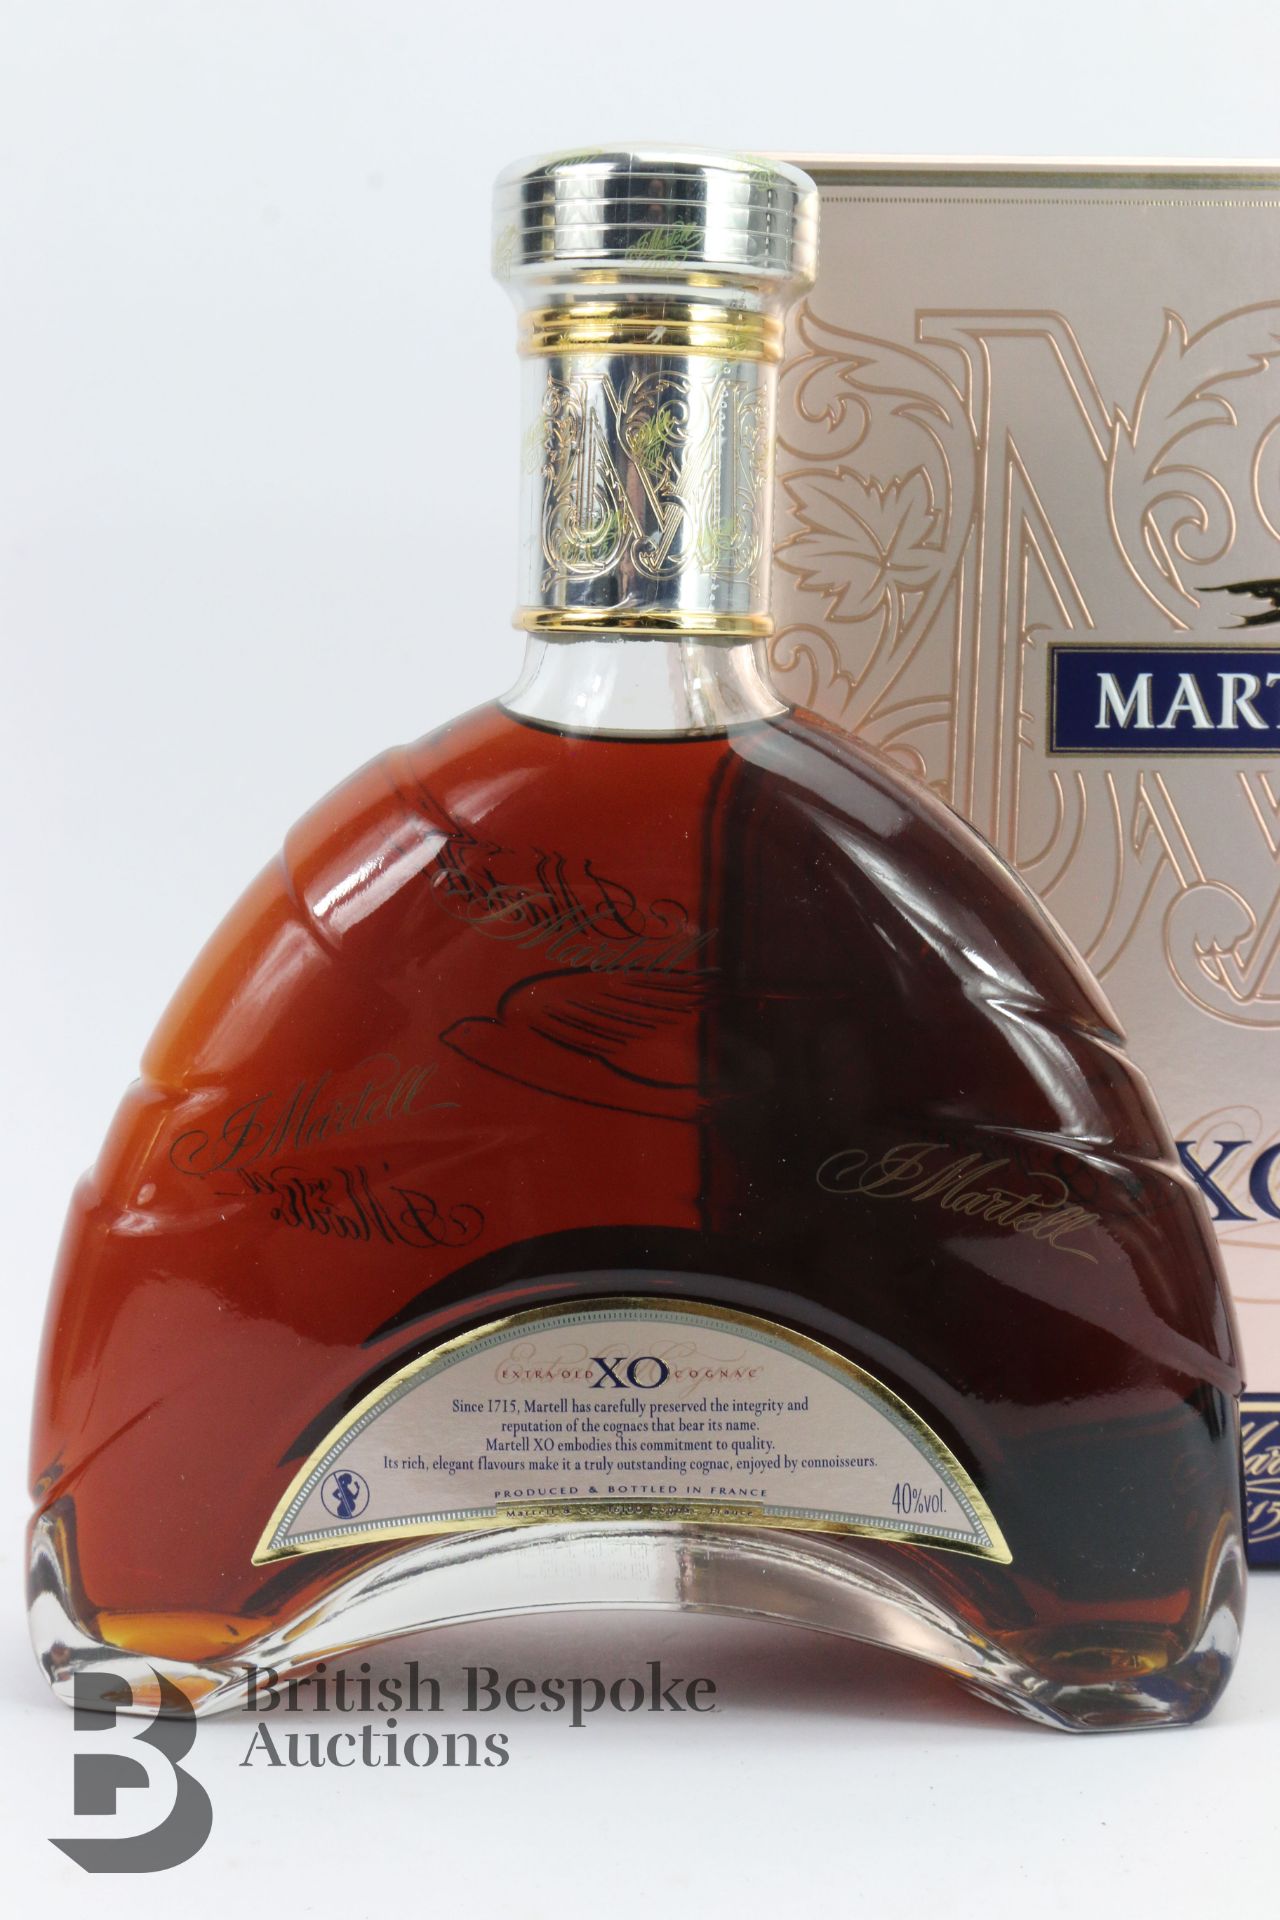 Martell Extra Old XO Cognac - Image 3 of 3